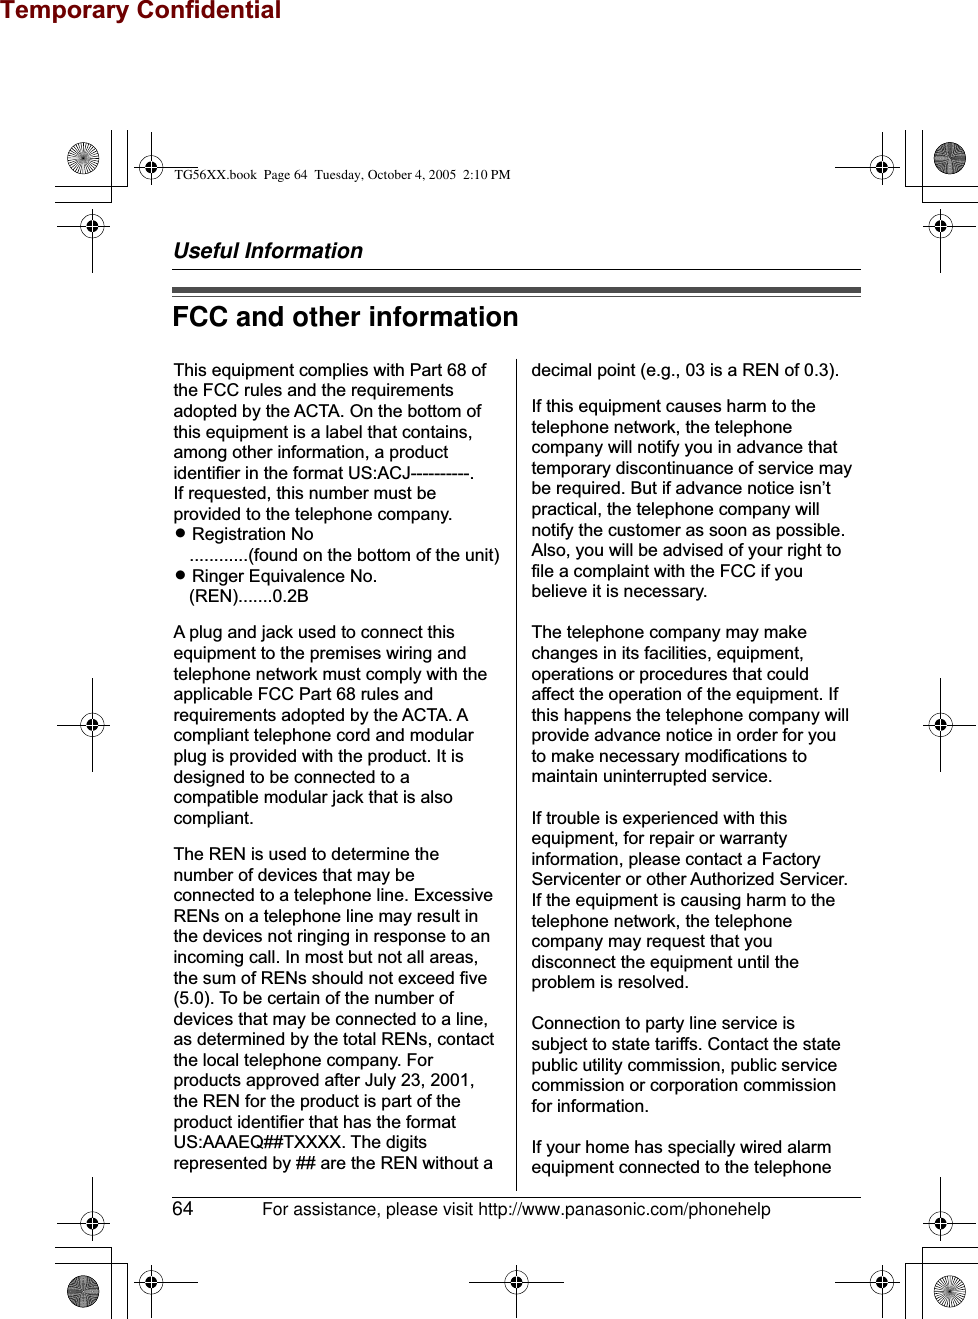 Temporary ConfidentialUseful Information64 For assistance, please visit http://www.panasonic.com/phonehelpFCC and other informationThis equipment complies with Part 68 of the FCC rules and the requirements adopted by the ACTA. On the bottom of this equipment is a label that contains, among other information, a product identifier in the format US:ACJ----------.If requested, this number must be provided to the telephone company.L Registration No   ............(found on the bottom of the unit)L Ringer Equivalence No.   (REN).......0.2BA plug and jack used to connect this equipment to the premises wiring and telephone network must comply with the applicable FCC Part 68 rules and requirements adopted by the ACTA. A compliant telephone cord and modular plug is provided with the product. It is designed to be connected to a compatible modular jack that is also compliant.The REN is used to determine the number of devices that may be connected to a telephone line. Excessive RENs on a telephone line may result in the devices not ringing in response to an incoming call. In most but not all areas, the sum of RENs should not exceed five (5.0). To be certain of the number of devices that may be connected to a line, as determined by the total RENs, contact the local telephone company. For products approved after July 23, 2001, the REN for the product is part of the product identifier that has the format US:AAAEQ##TXXXX. The digits represented by ## are the REN without adecimal point (e.g., 03 is a REN of 0.3).If this equipment causes harm to the telephone network, the telephone company will notify you in advance that  temporary discontinuance of service may be required. But if advance notice isn’t practical, the telephone company will notify the customer as soon as possible. Also, you will be advised of your right to file a complaint with the FCC if you believe it is necessary.The telephone company may make changes in its facilities, equipment, operations or procedures that could affect the operation of the equipment. If this happens the telephone company will provide advance notice in order for you to make necessary modifications to maintain uninterrupted service.If trouble is experienced with this equipment, for repair or warranty information, please contact a Factory Servicenter or other Authorized Servicer. If the equipment is causing harm to the telephone network, the telephone company may request that you disconnect the equipment until the problem is resolved.Connection to party line service is subject to state tariffs. Contact the state public utility commission, public service commission or corporation commission for information.If your home has specially wired alarm equipment connected to the telephone TG56XX.book  Page 64  Tuesday, October 4, 2005  2:10 PM